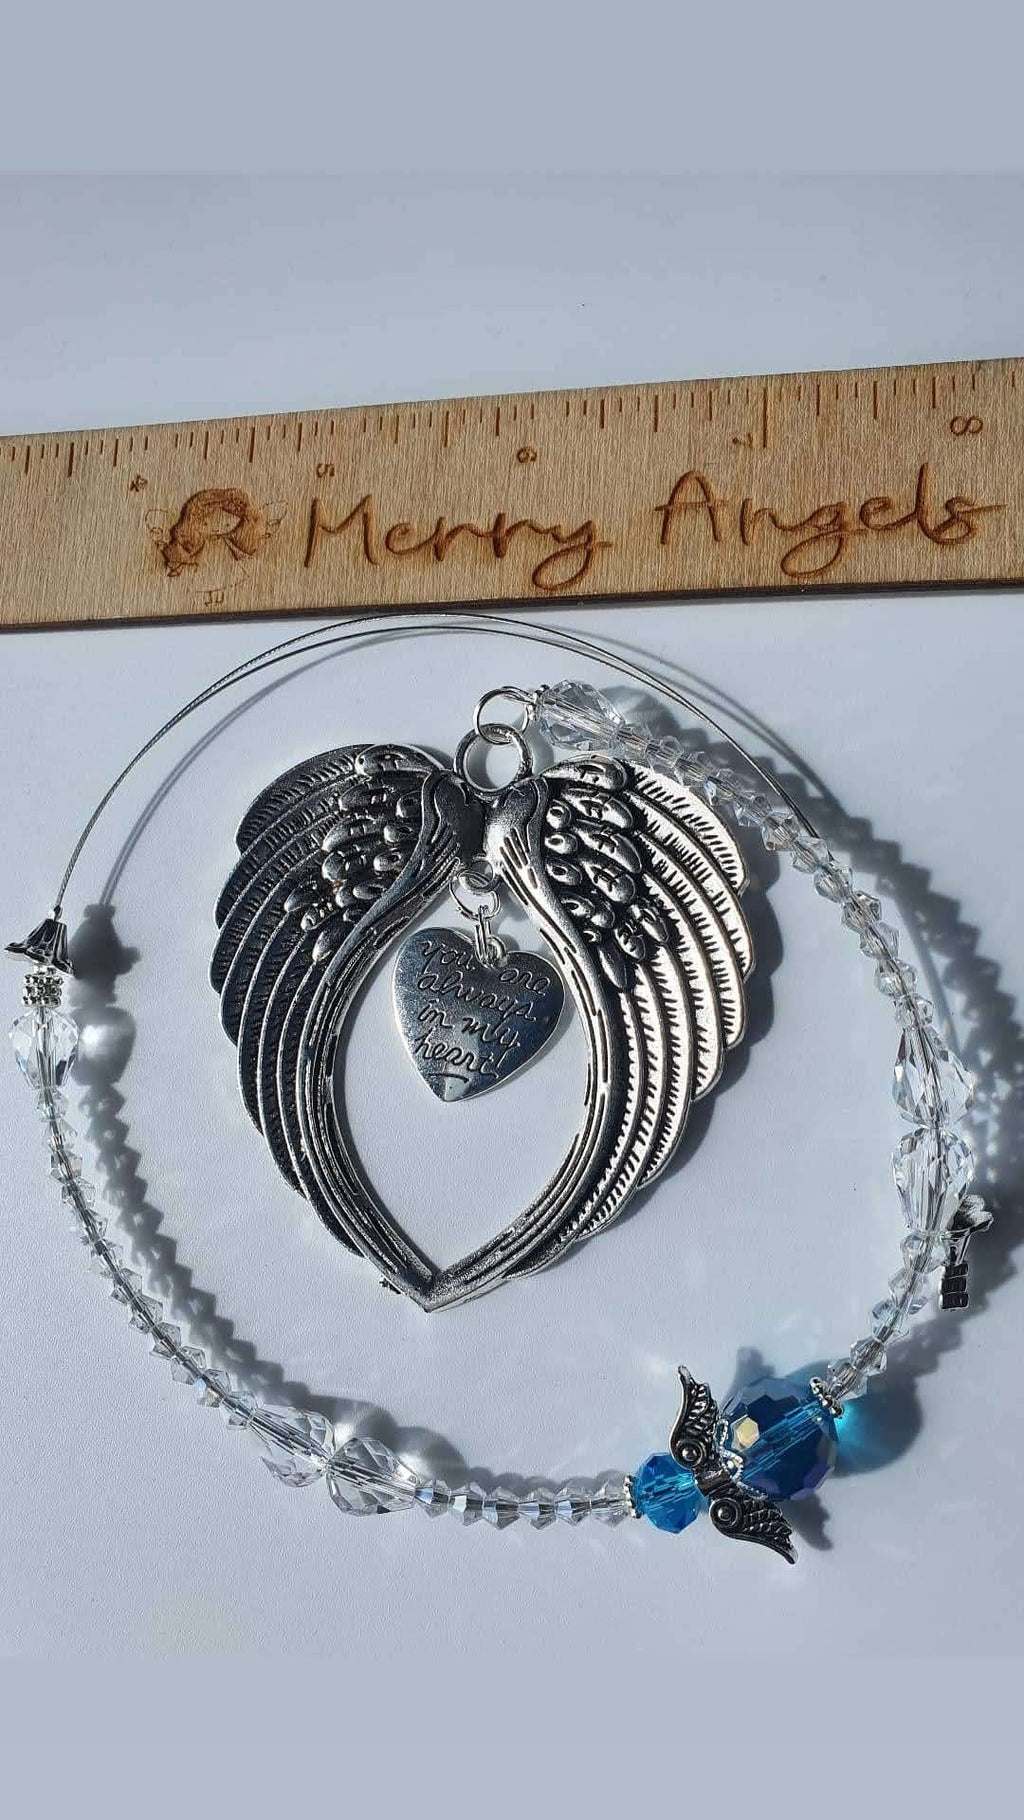 Silver angel wing hanging charm with silver heart charm in centre that reads: You are always in my heart. There is a blue angel with silver wings and clear beads too. 